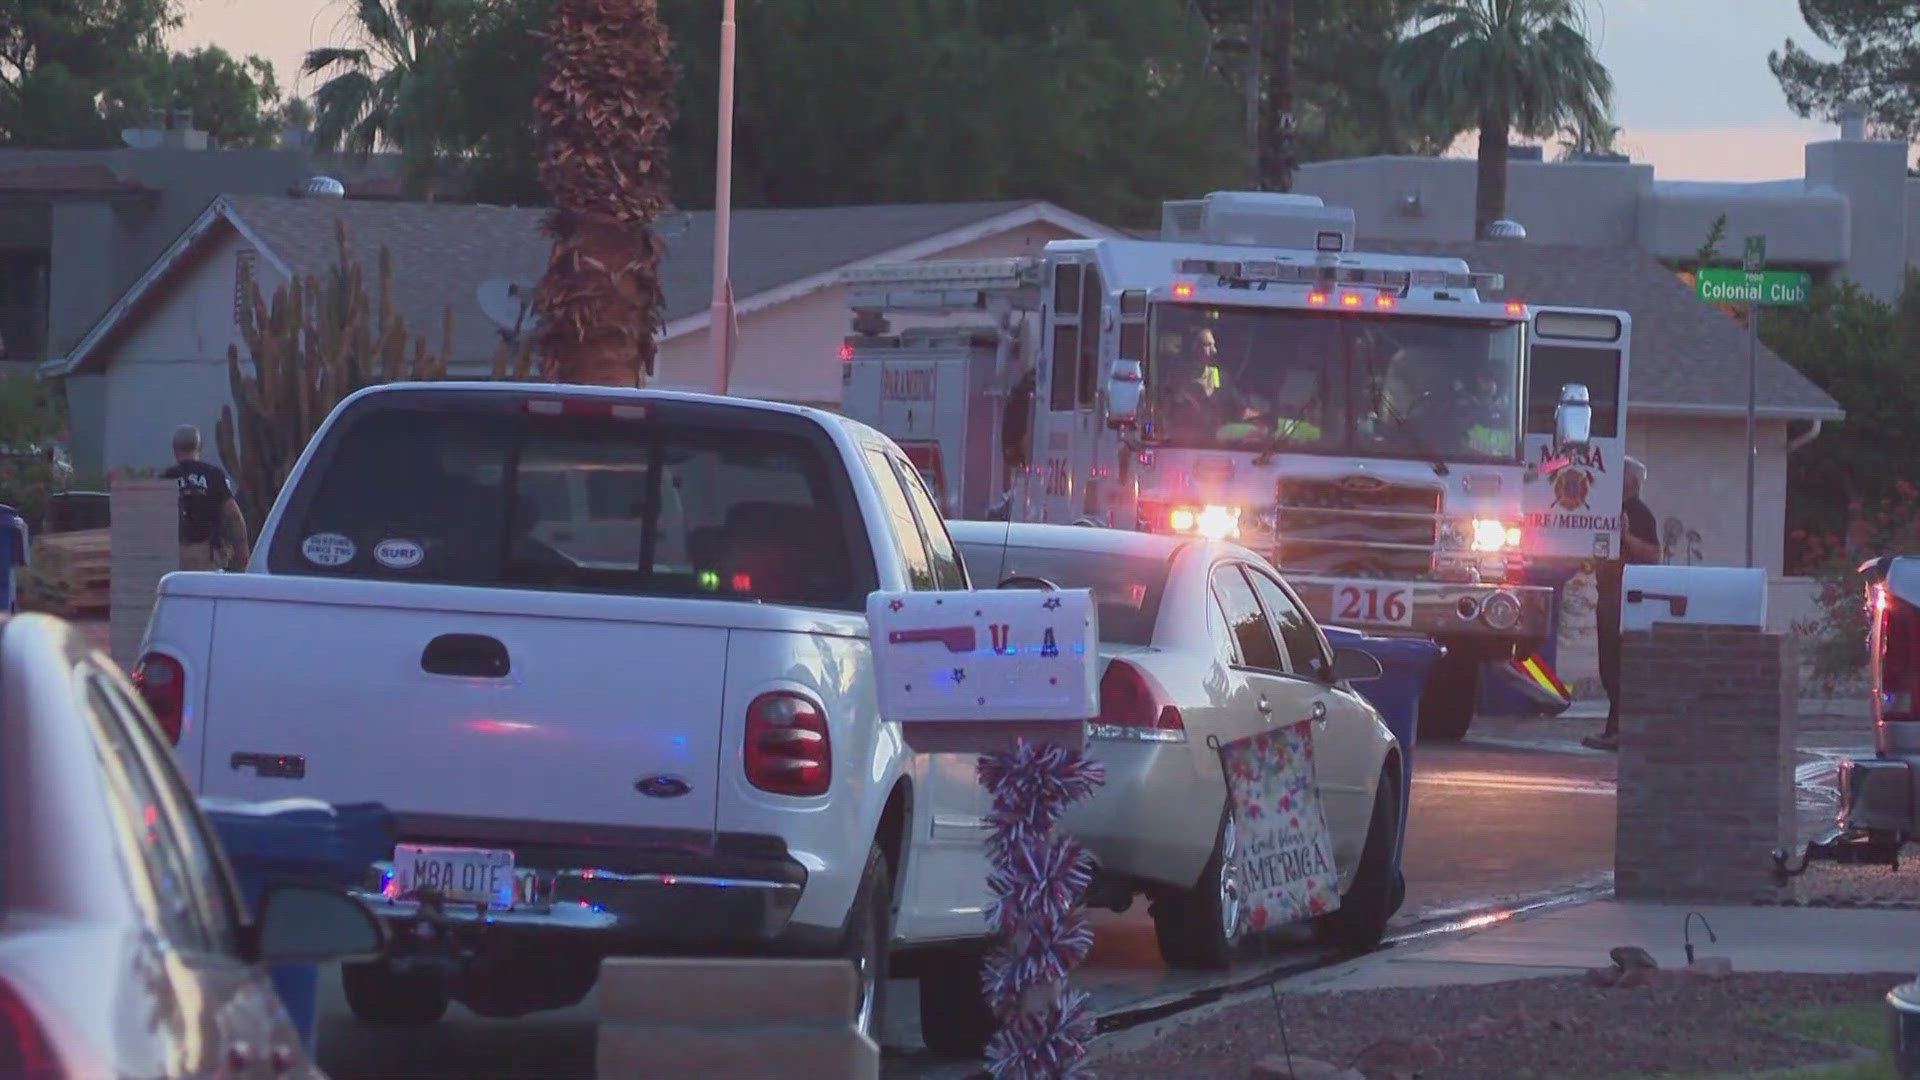 The fire started around 2:30 a.m., Mesa police said.